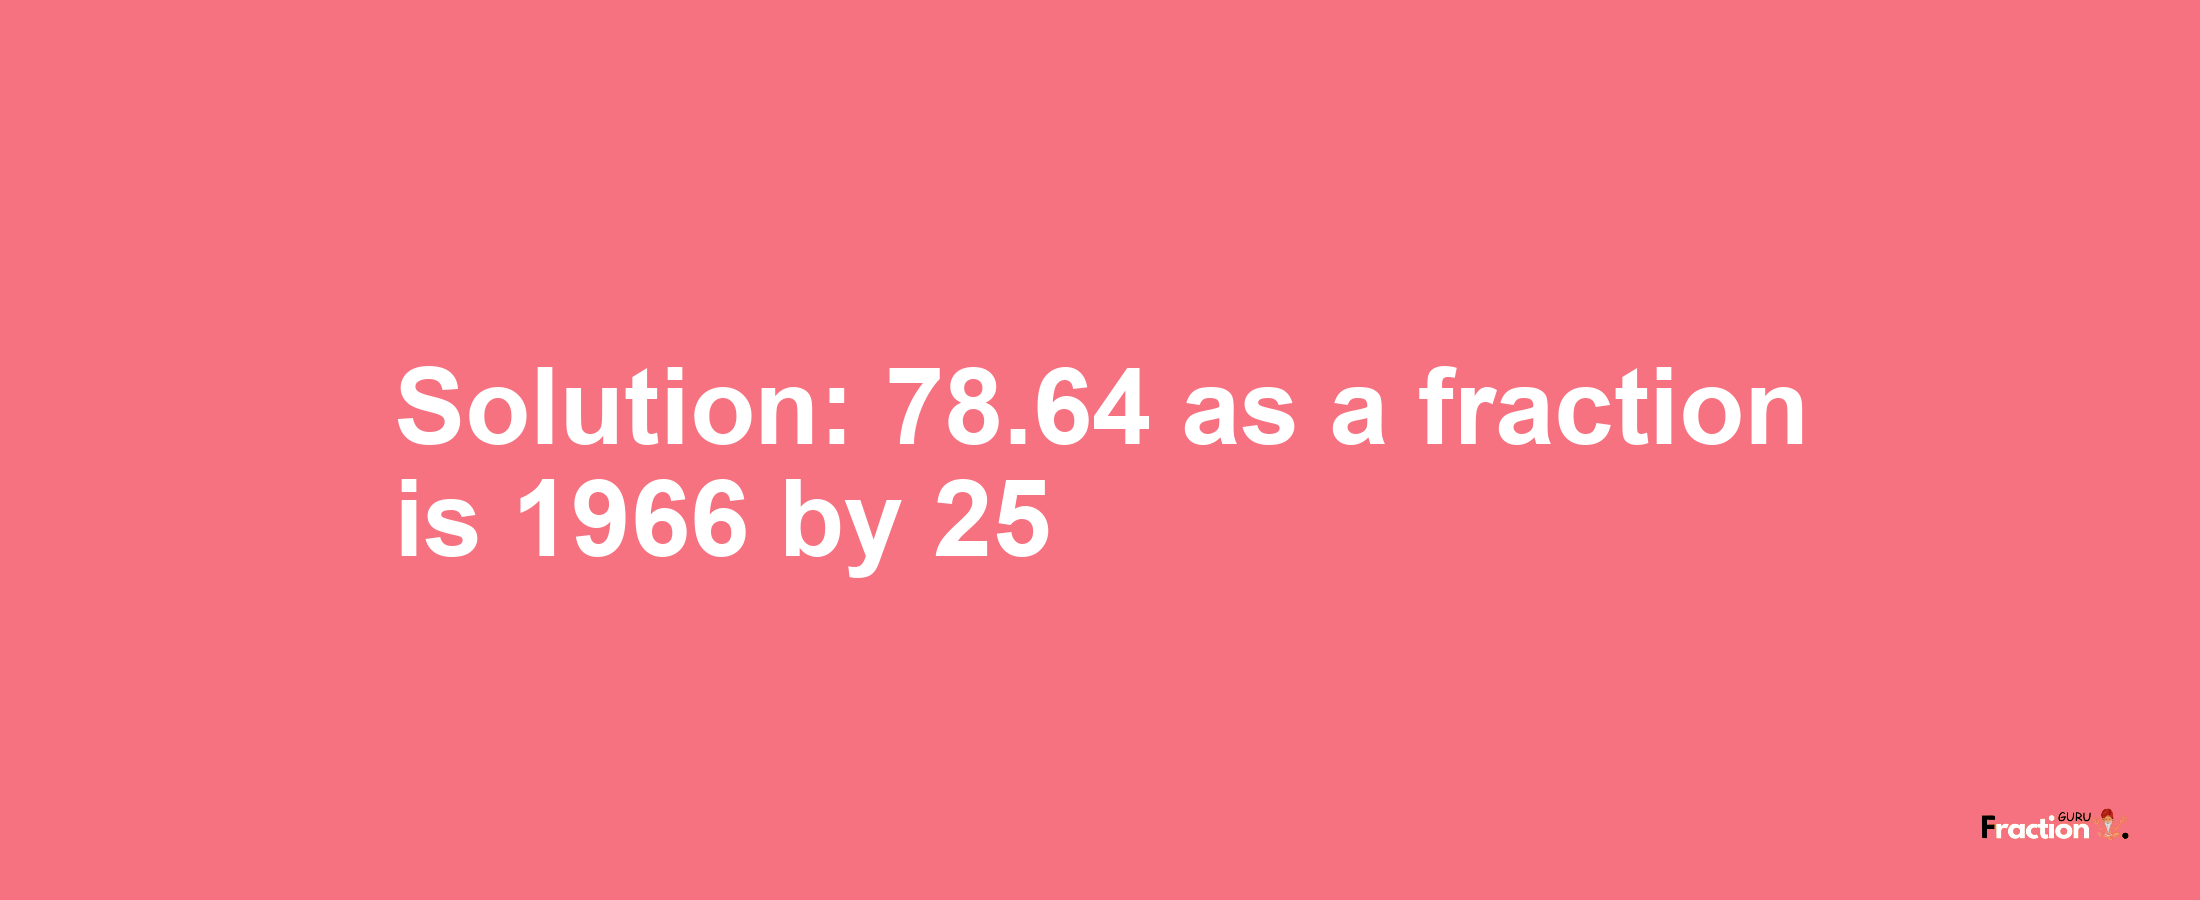 Solution:78.64 as a fraction is 1966/25